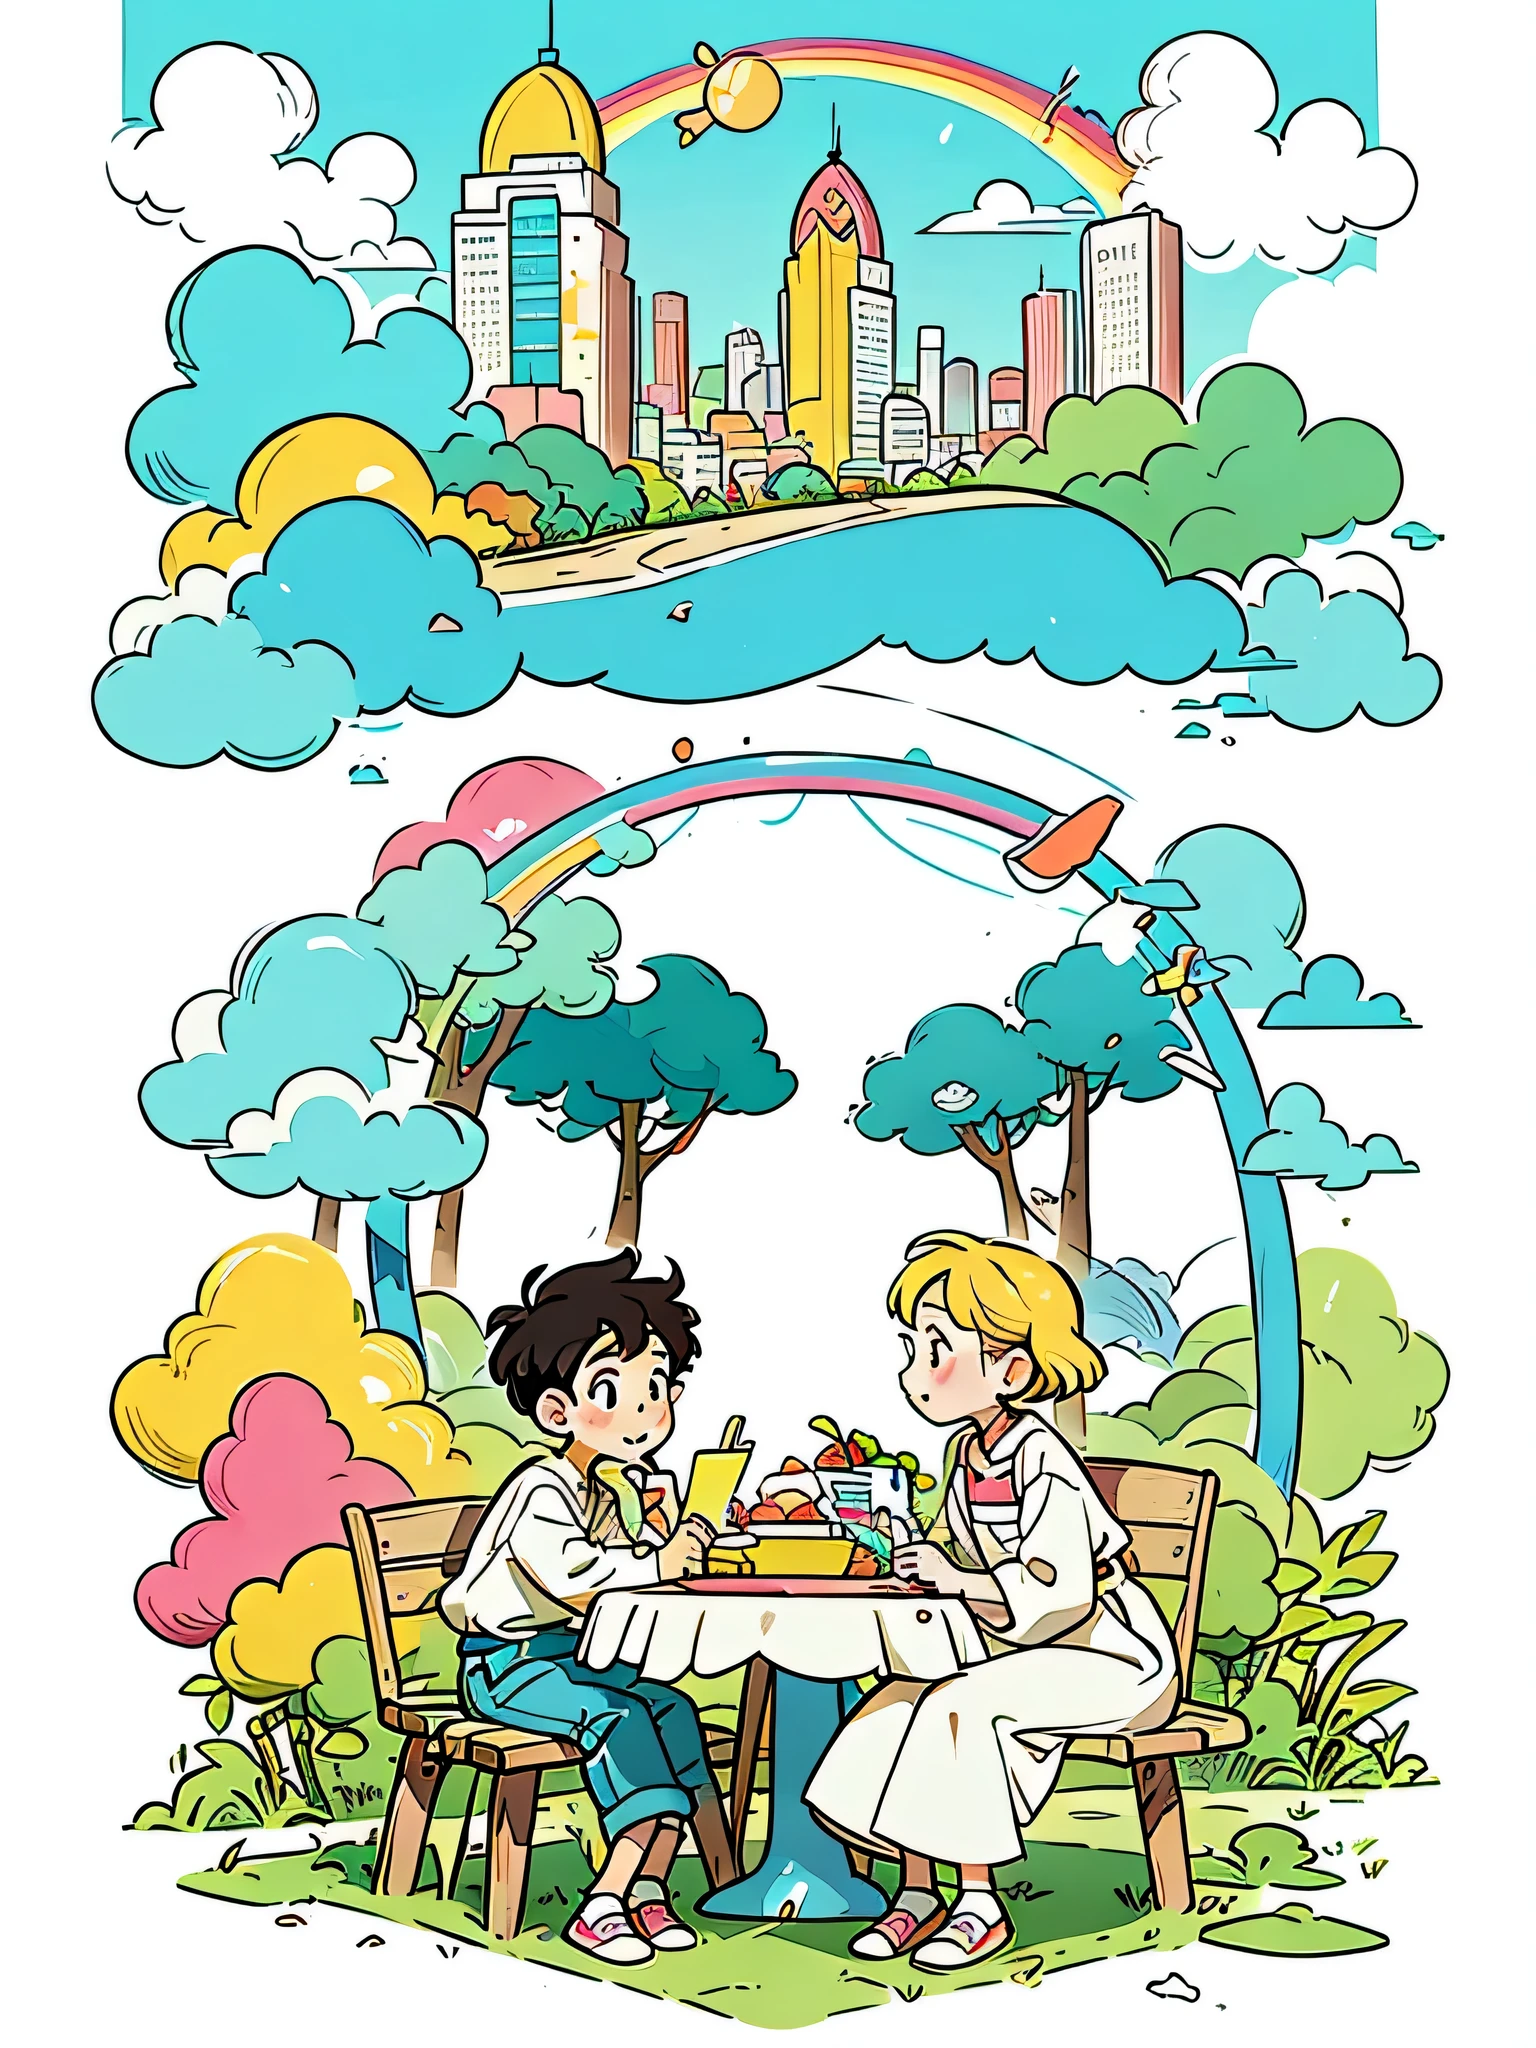 Vector illustration of young, fashionable men and women picnicking in the park, with flowing lines and warm colors set against a white background. The scene captures the essence of a modern, stylish park environment, where young people gather to relax and enjoy each other's company. The design features clean, simple lines and a limited color palette, emphasizing the sophisticated beauty of the urban park setting. The characters, with their youthful energy and trendy outfits, embody the vibrancy and grace of city life. The super saturated, vivid, and bright colors, rendered in a pop art vector style, lend a sense of surrealism and whimsy to the scene, creating a visually captivating and memorable composition.